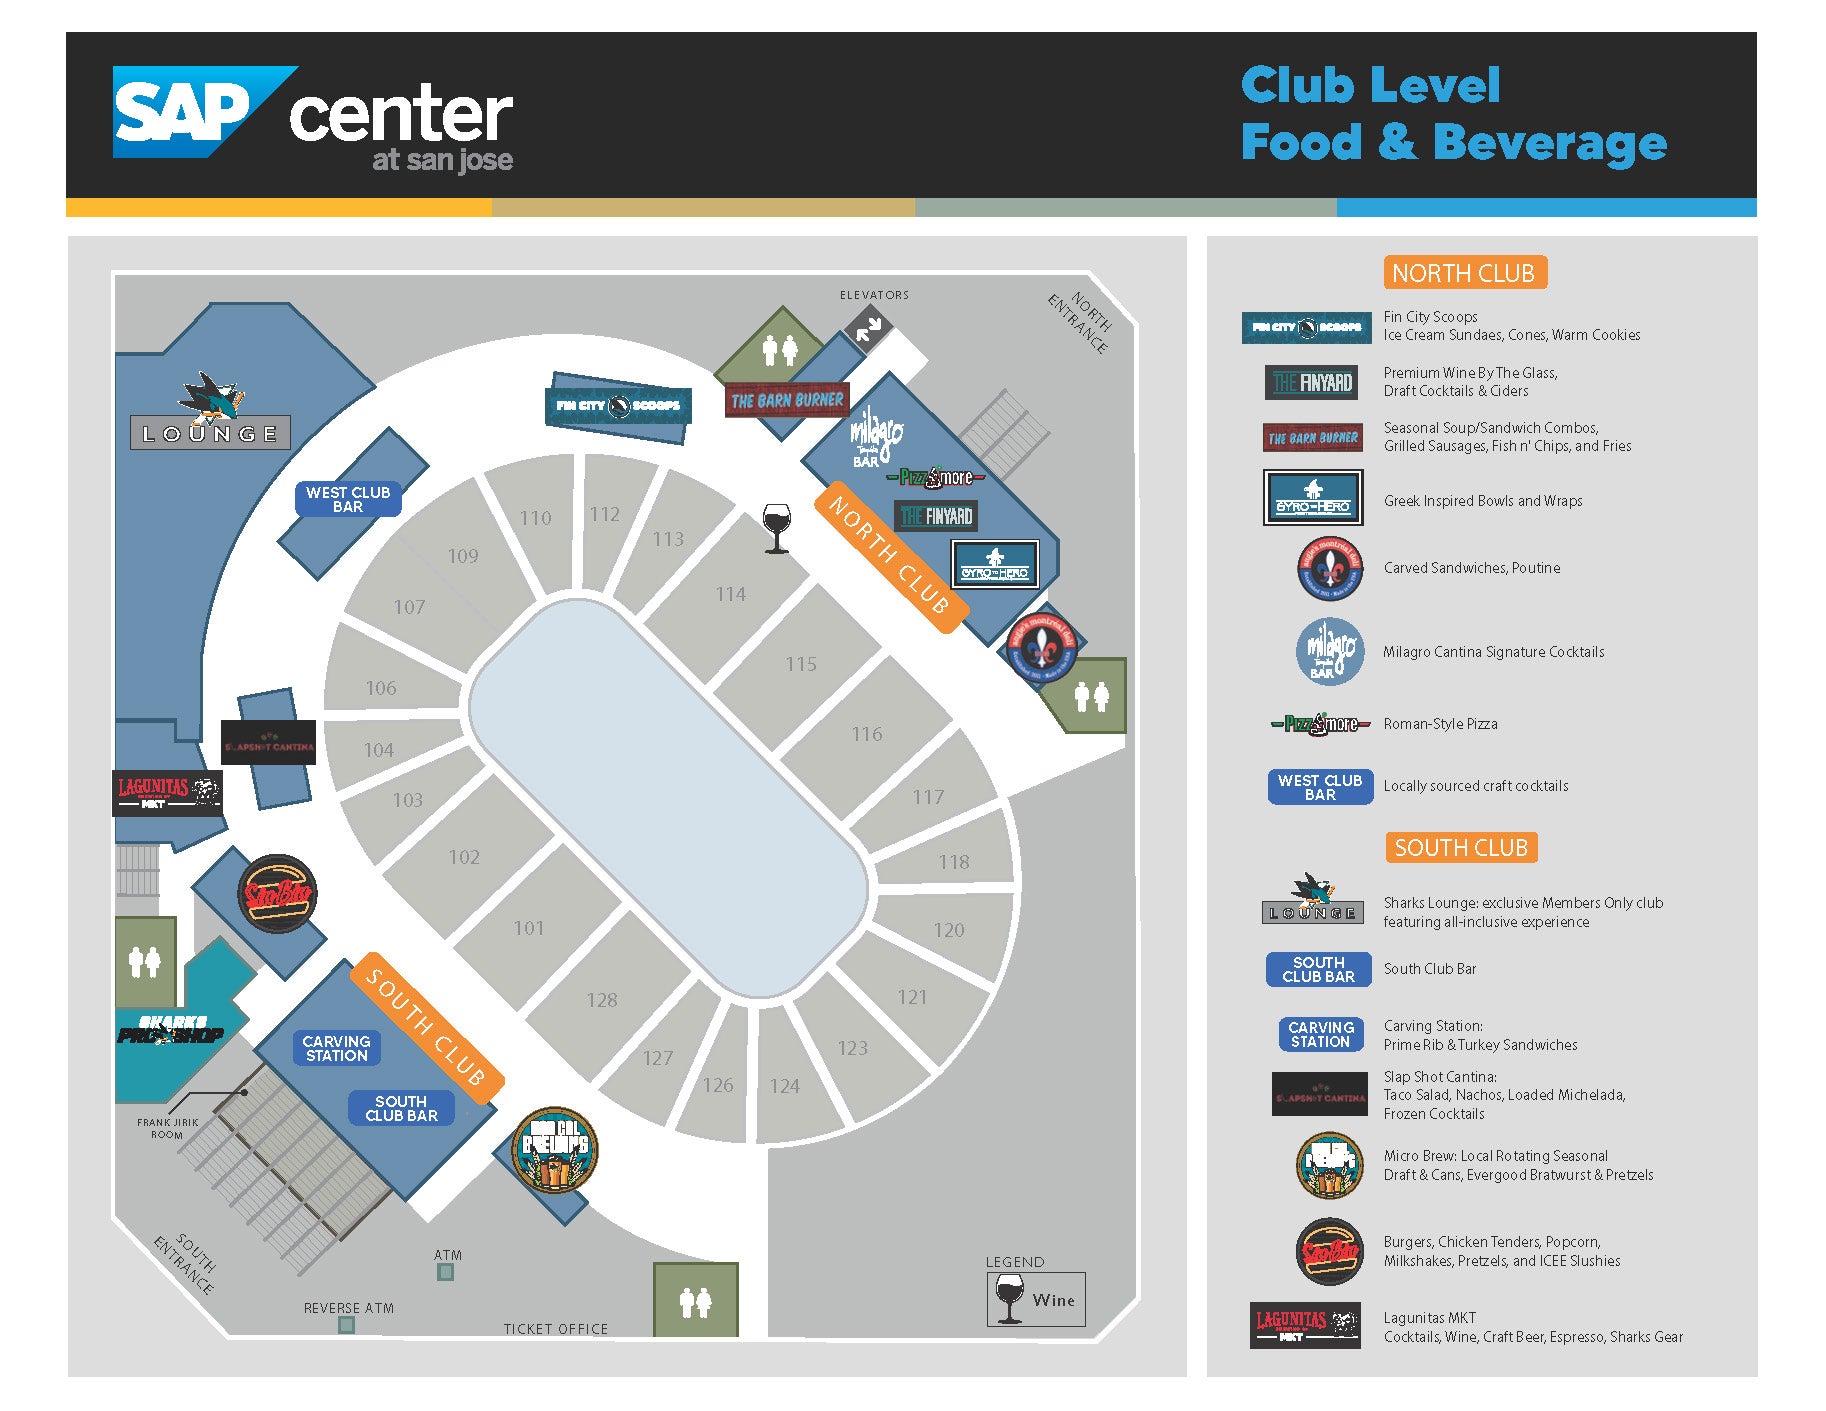 Section 118 at SAP Center 